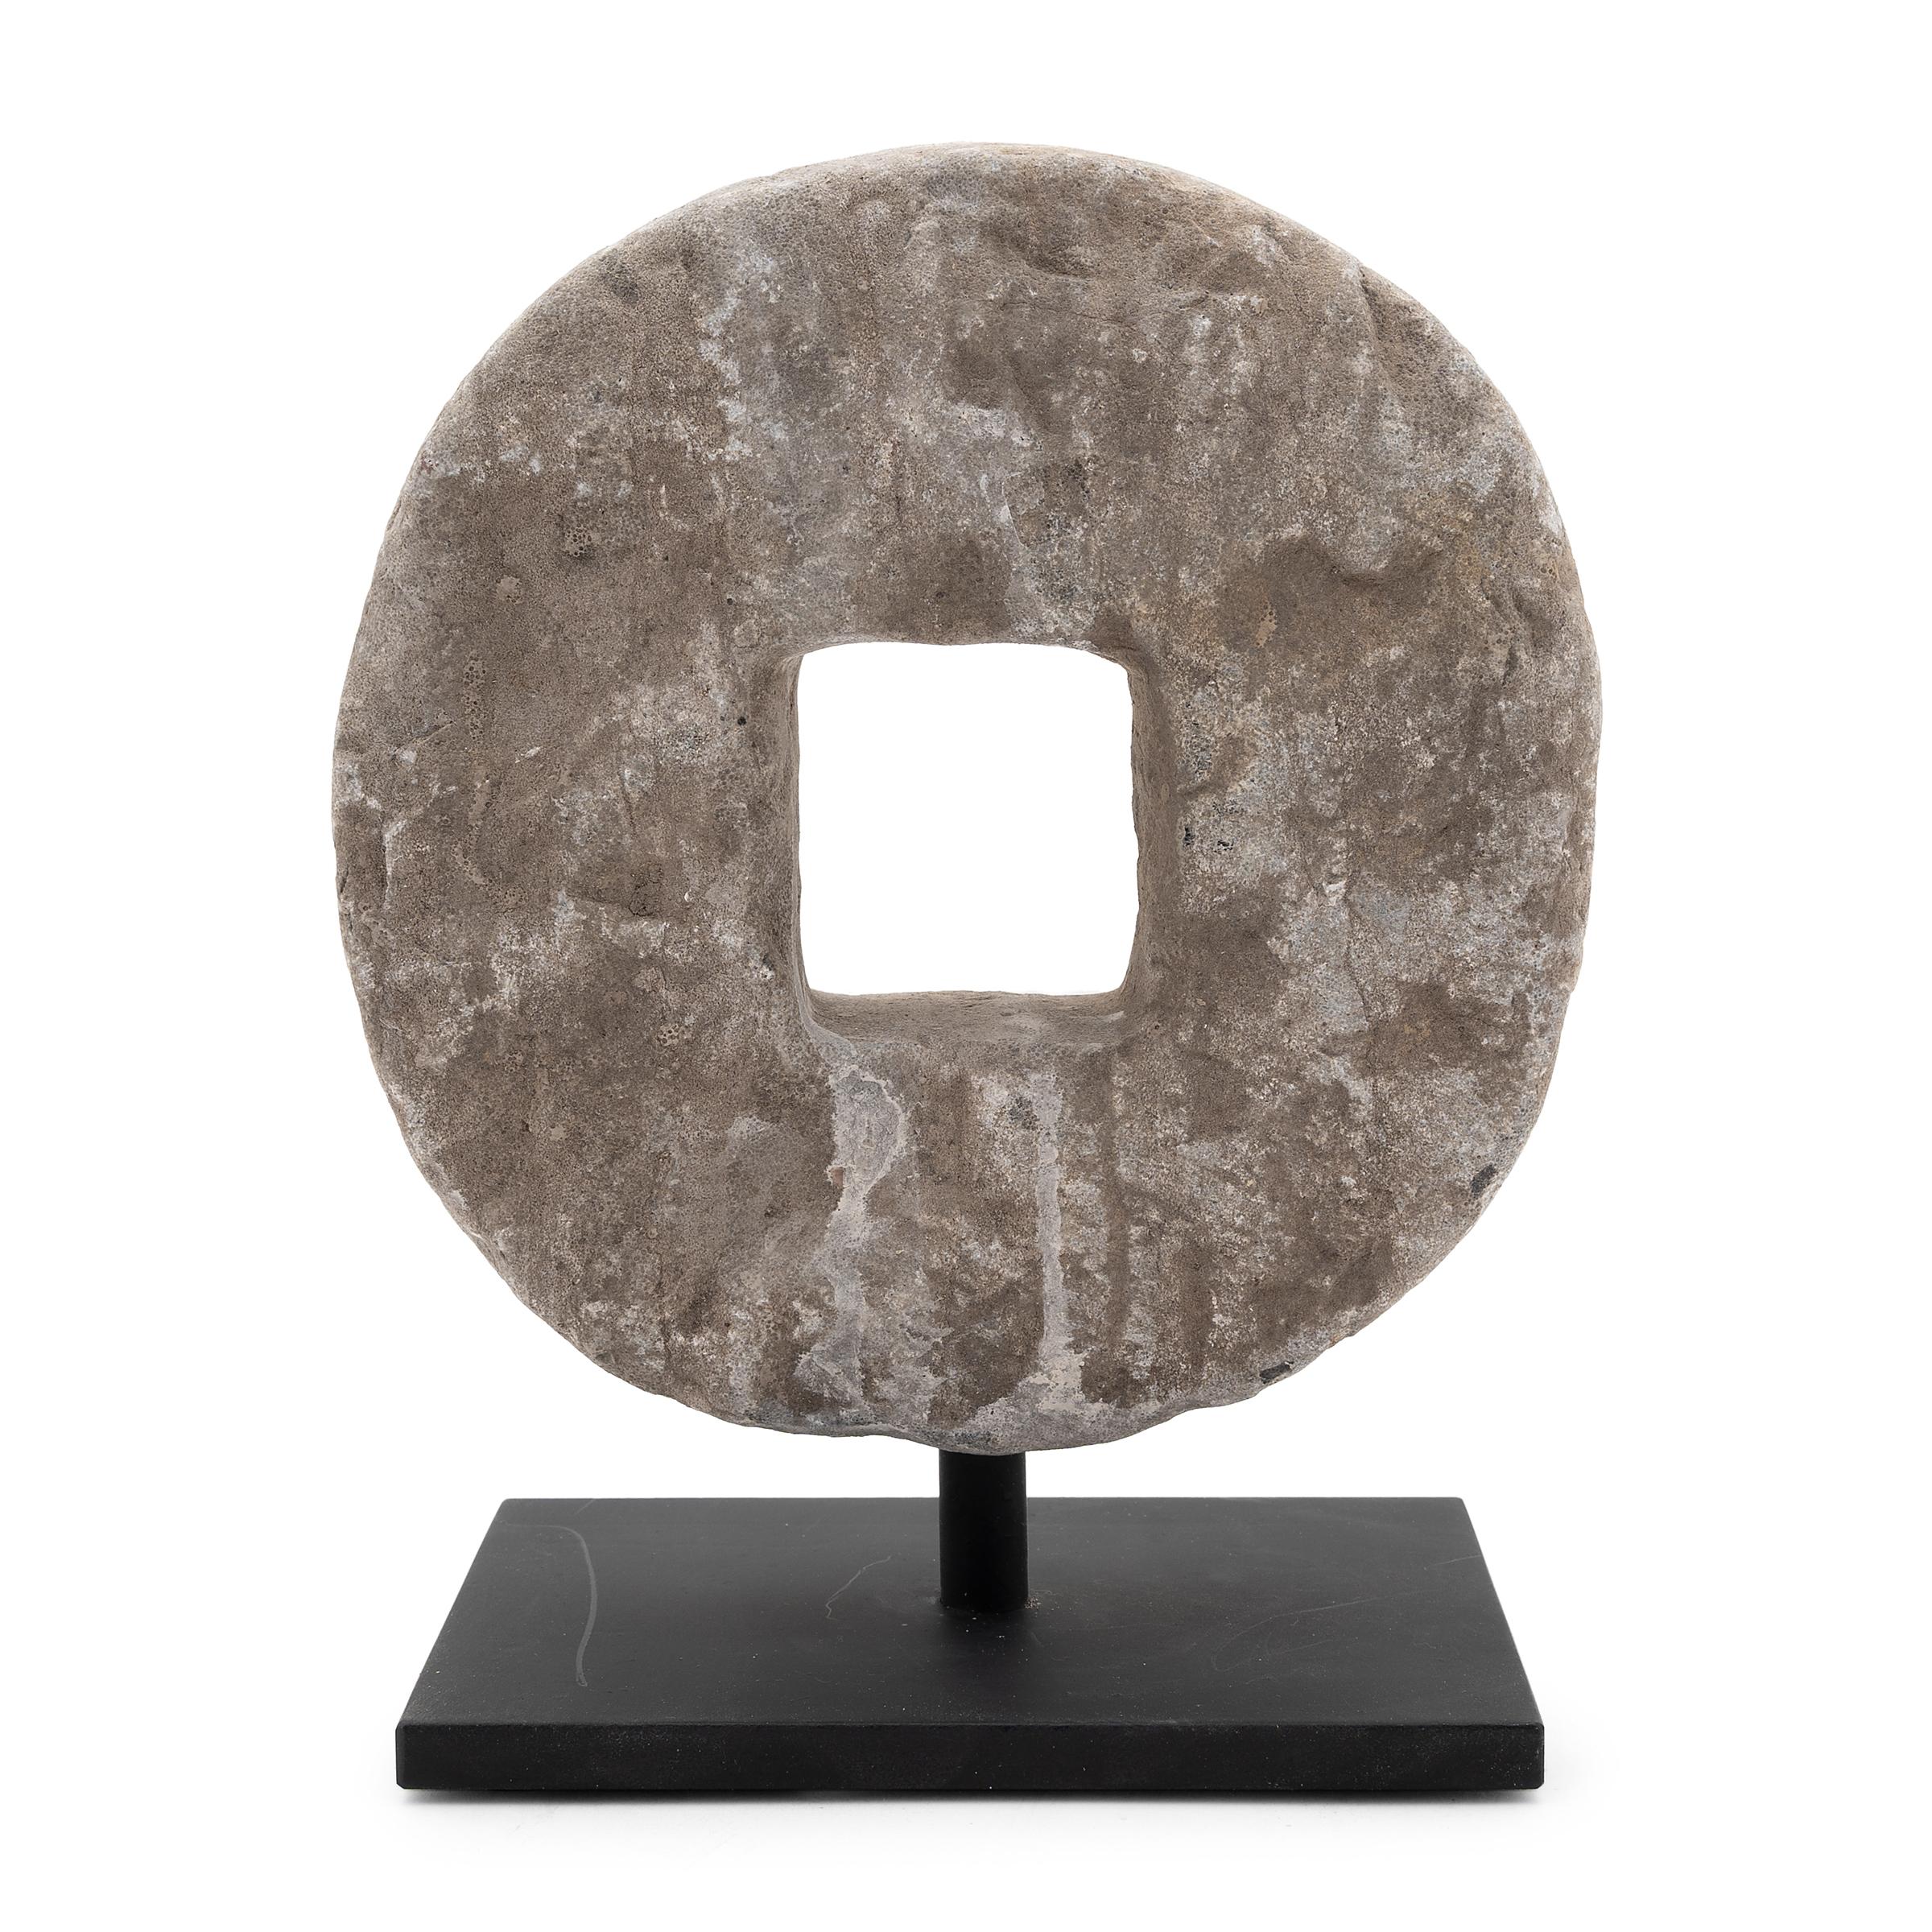 This round stone disc originated as an early 20th-century threshing wheel. Secured to a wooden axel that ran through the center, the stone was rolled across stalks of wheat to separate the grain, pulled either by man or by ox. With simplicity of